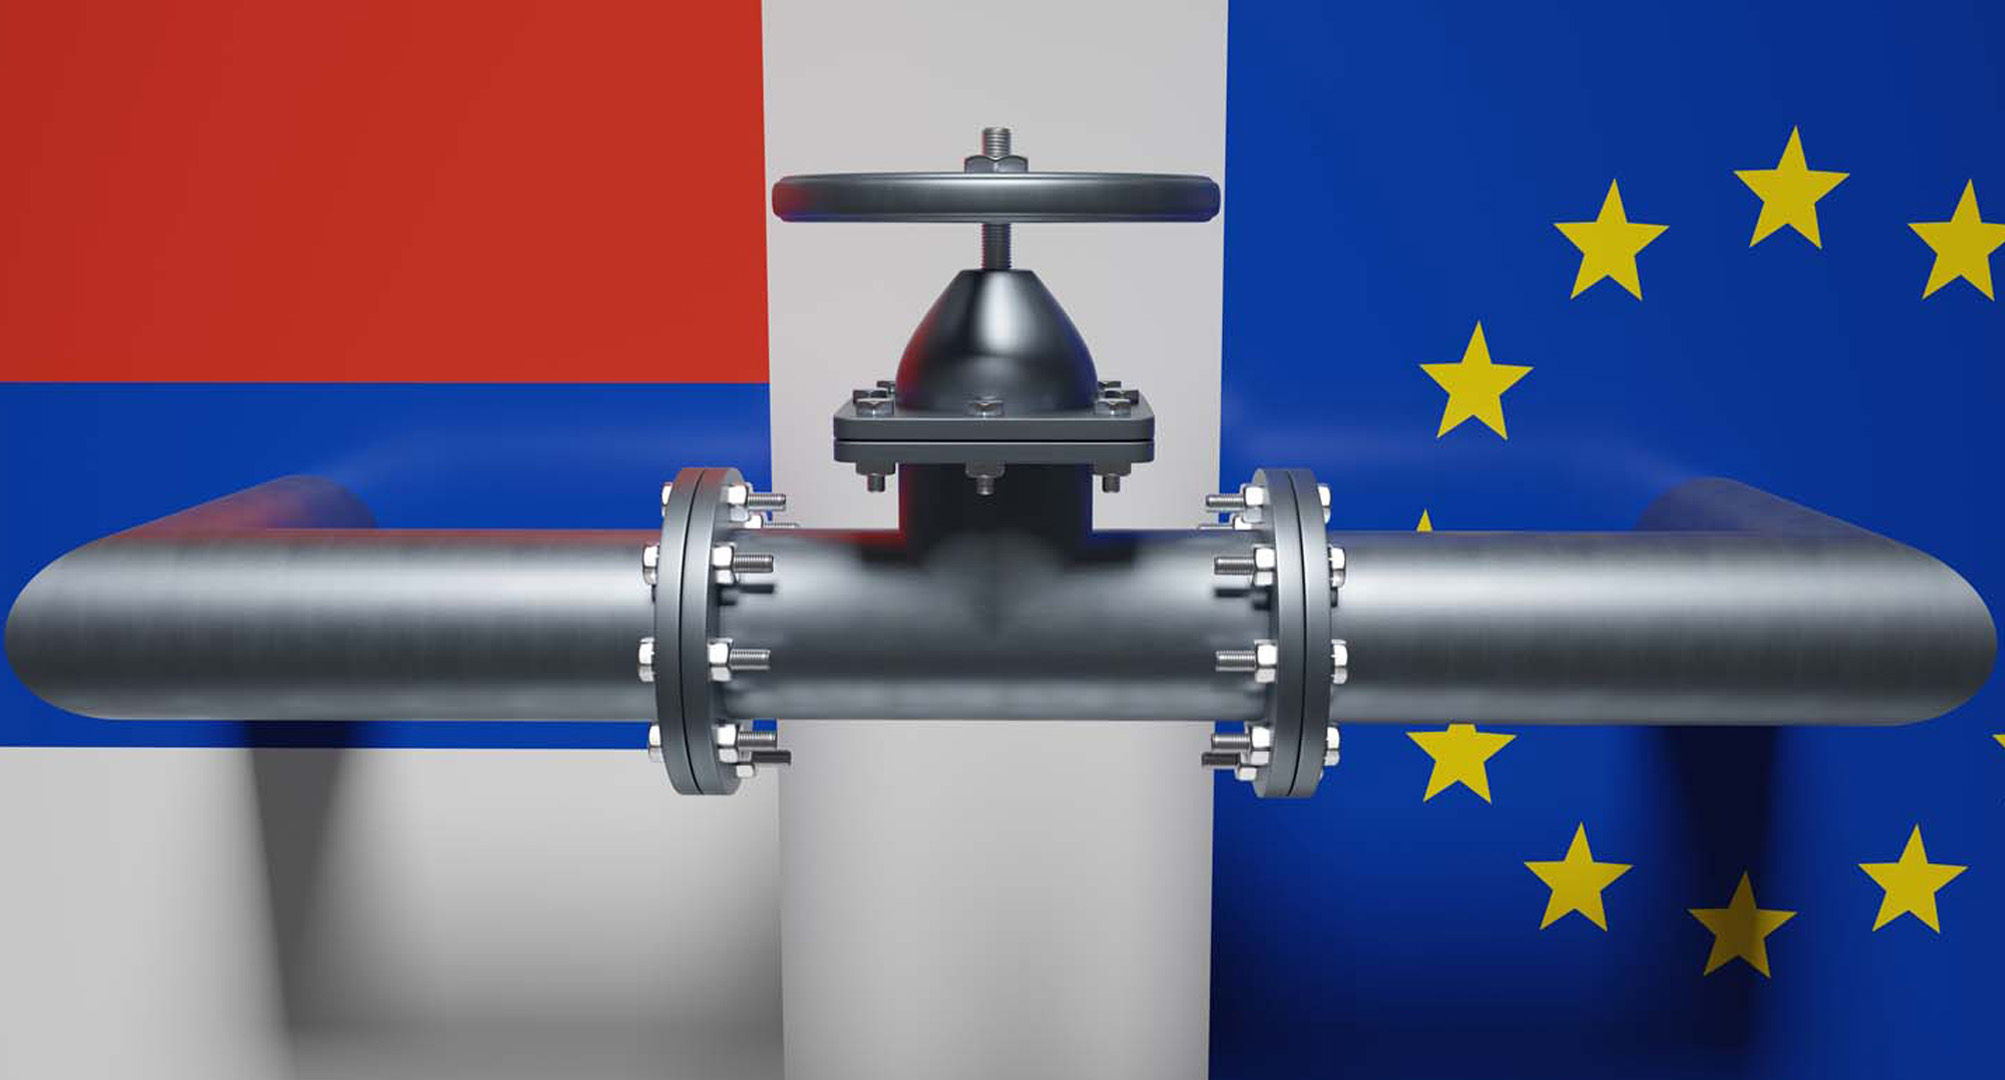 Natural gas between Russia and Europe